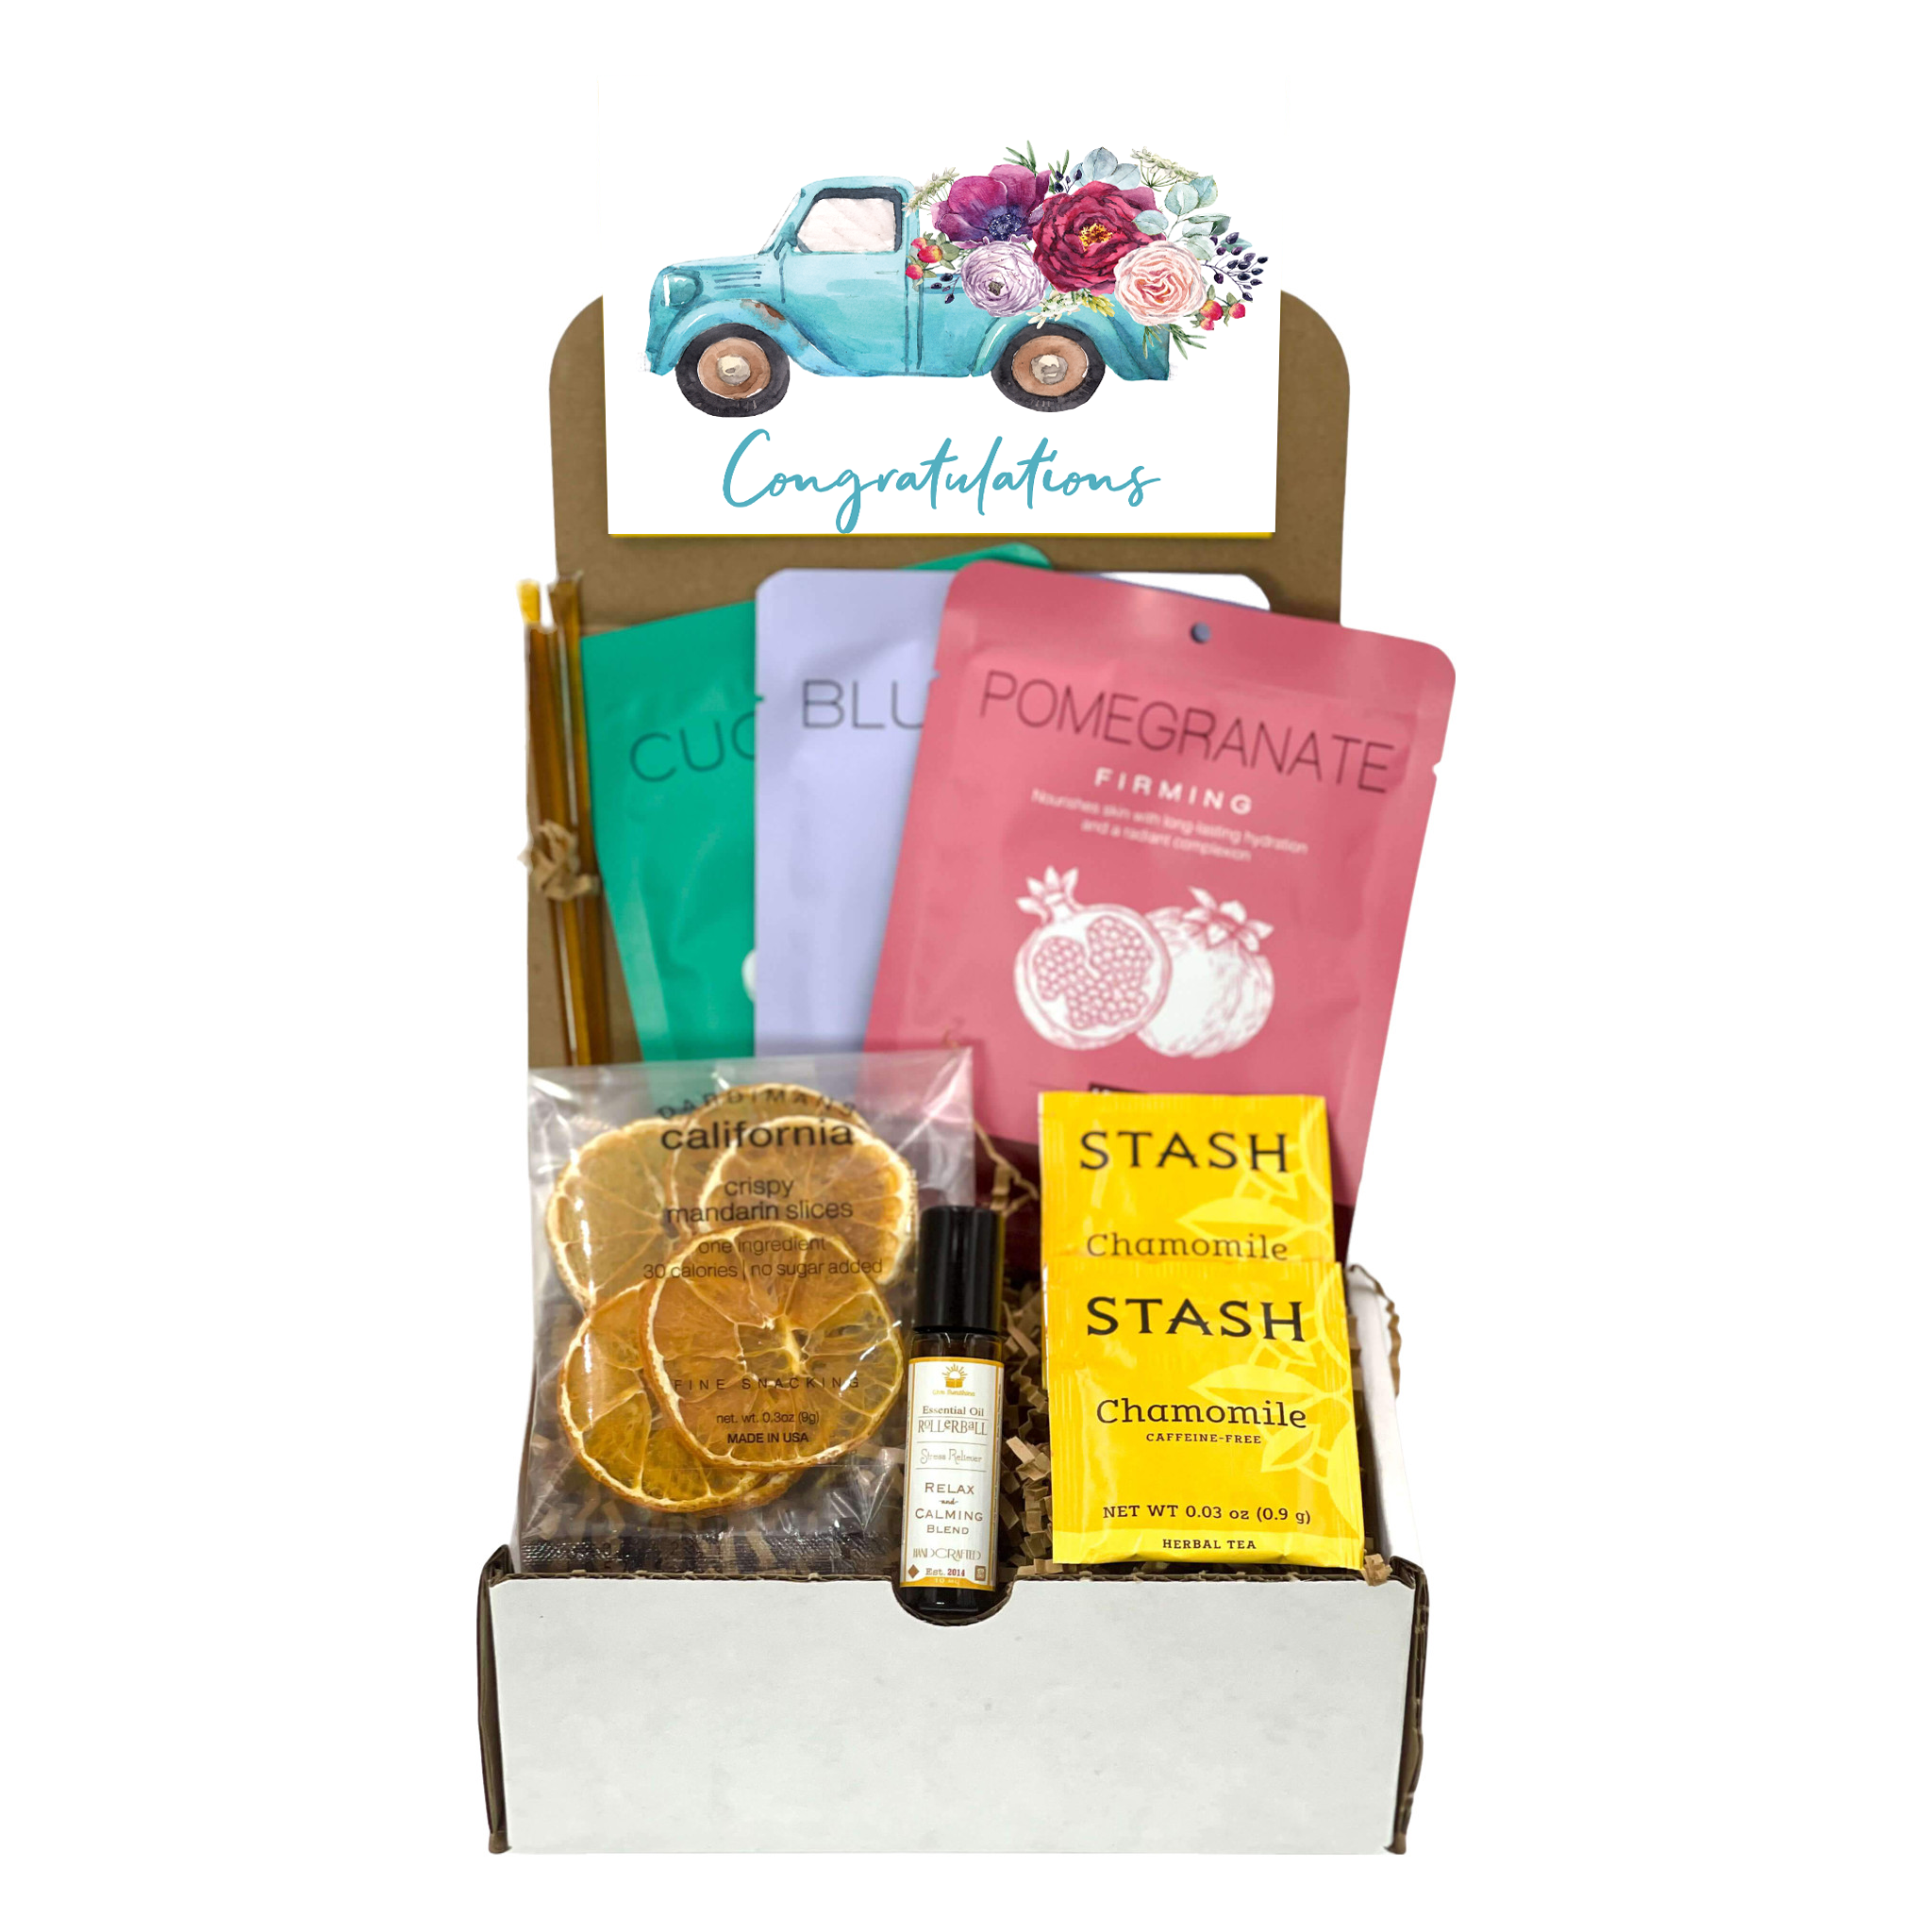 Buy Sunshine Gift Box, Summer Gifts, Spa Gift Basket, Personalized Gift,  Gift for Mom, Best Friend Gift, Thinking of You Gift, Thank You Gift.  Online in India - Etsy